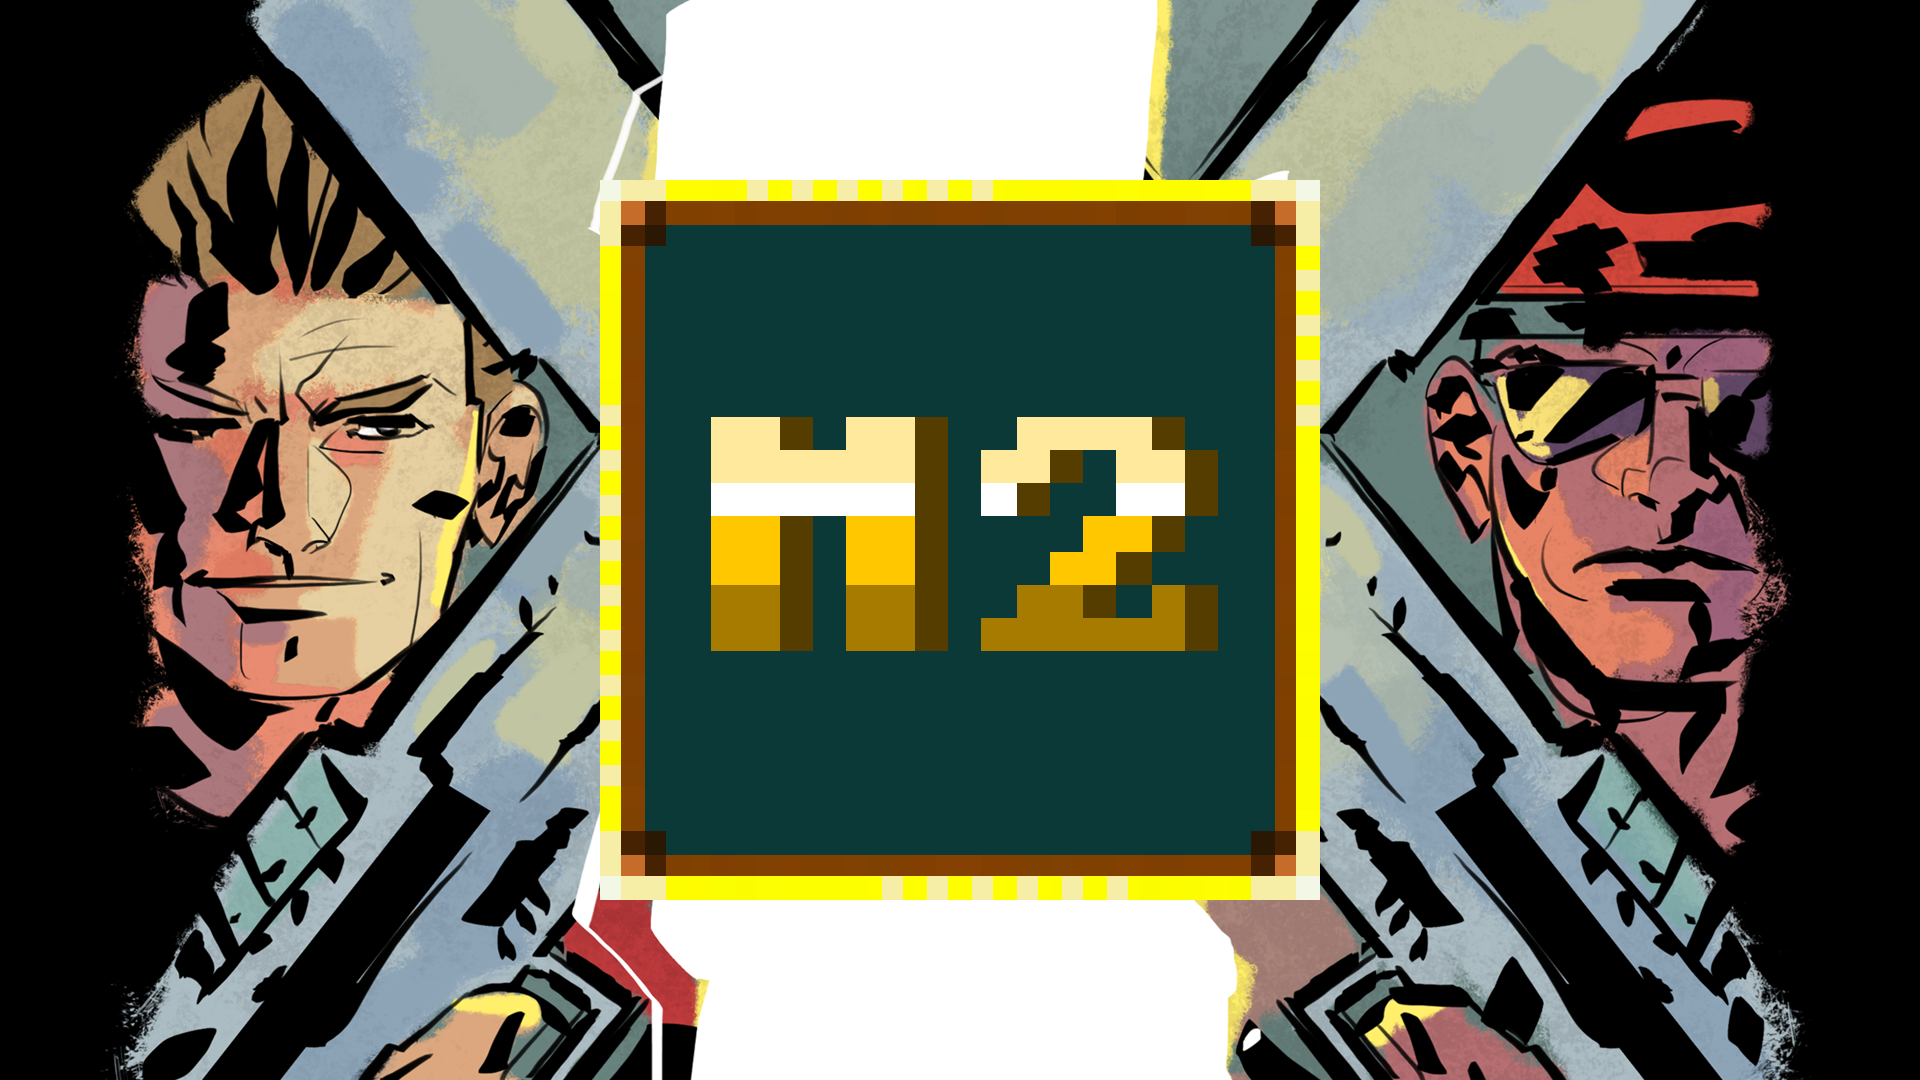 Icon for Mission 2